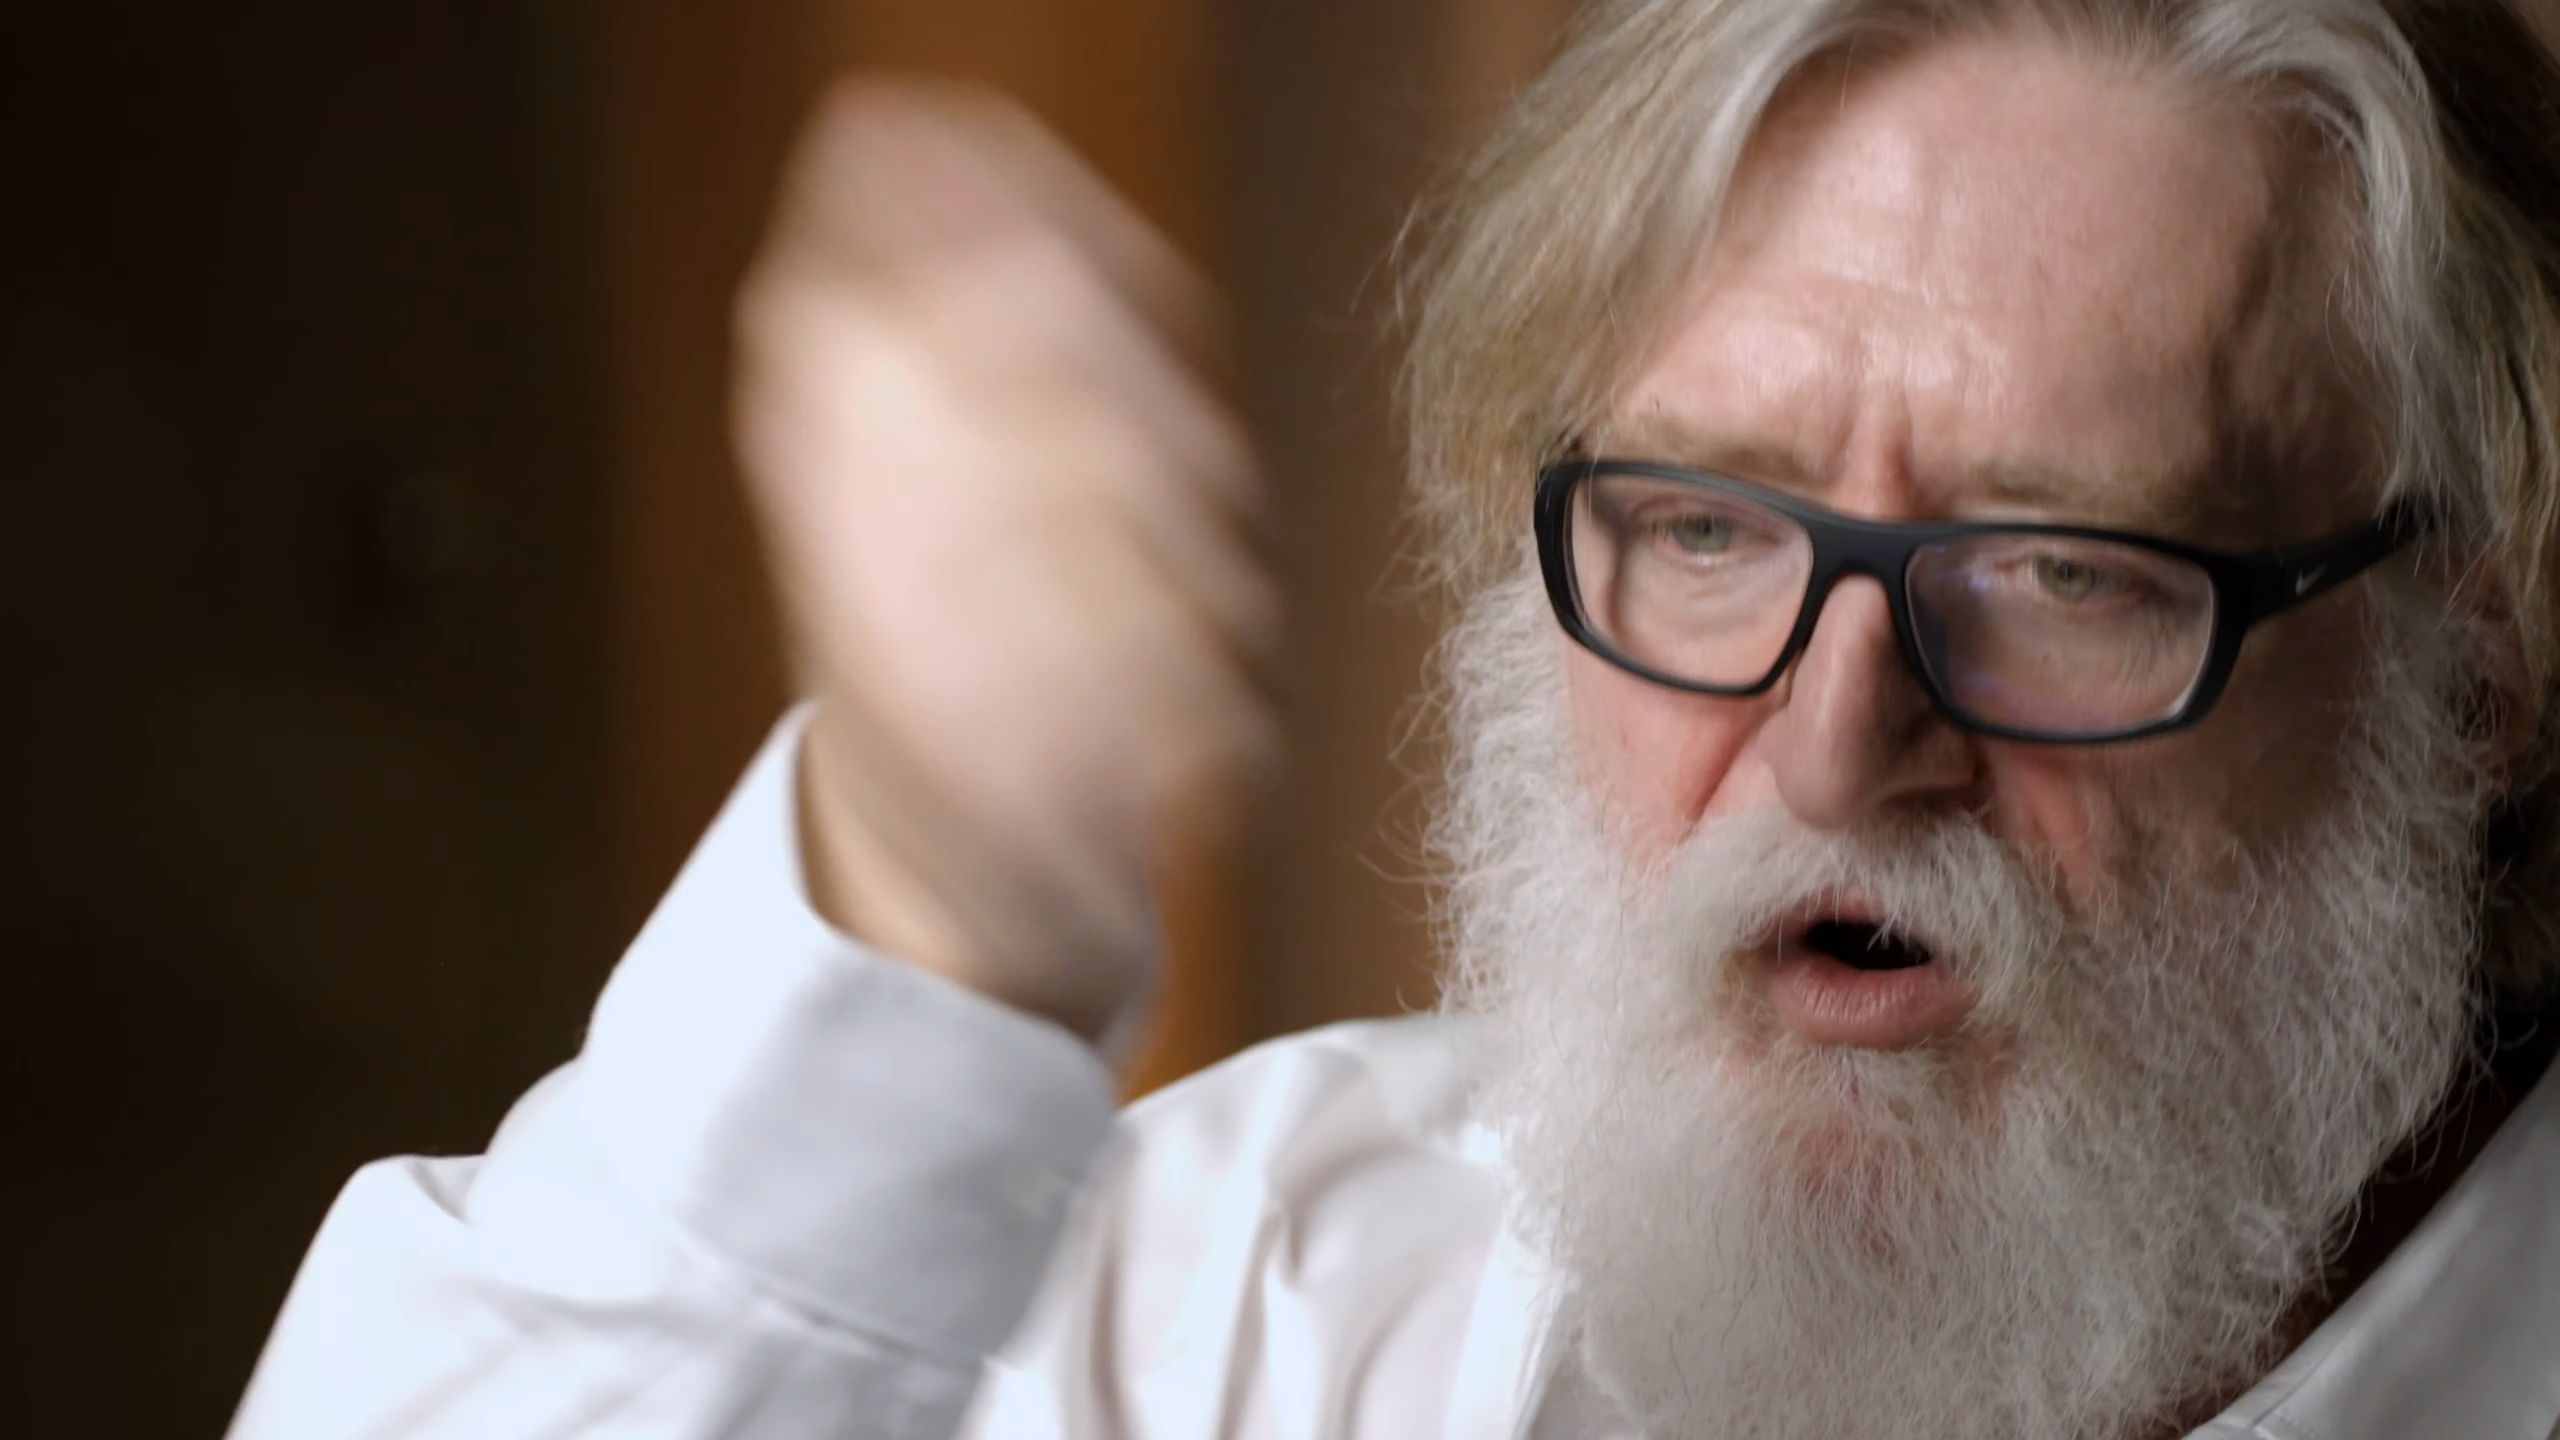 Gabe Newell on making Half-Life's crowbar fun: 'We were just running around  like idiots smacking the wall